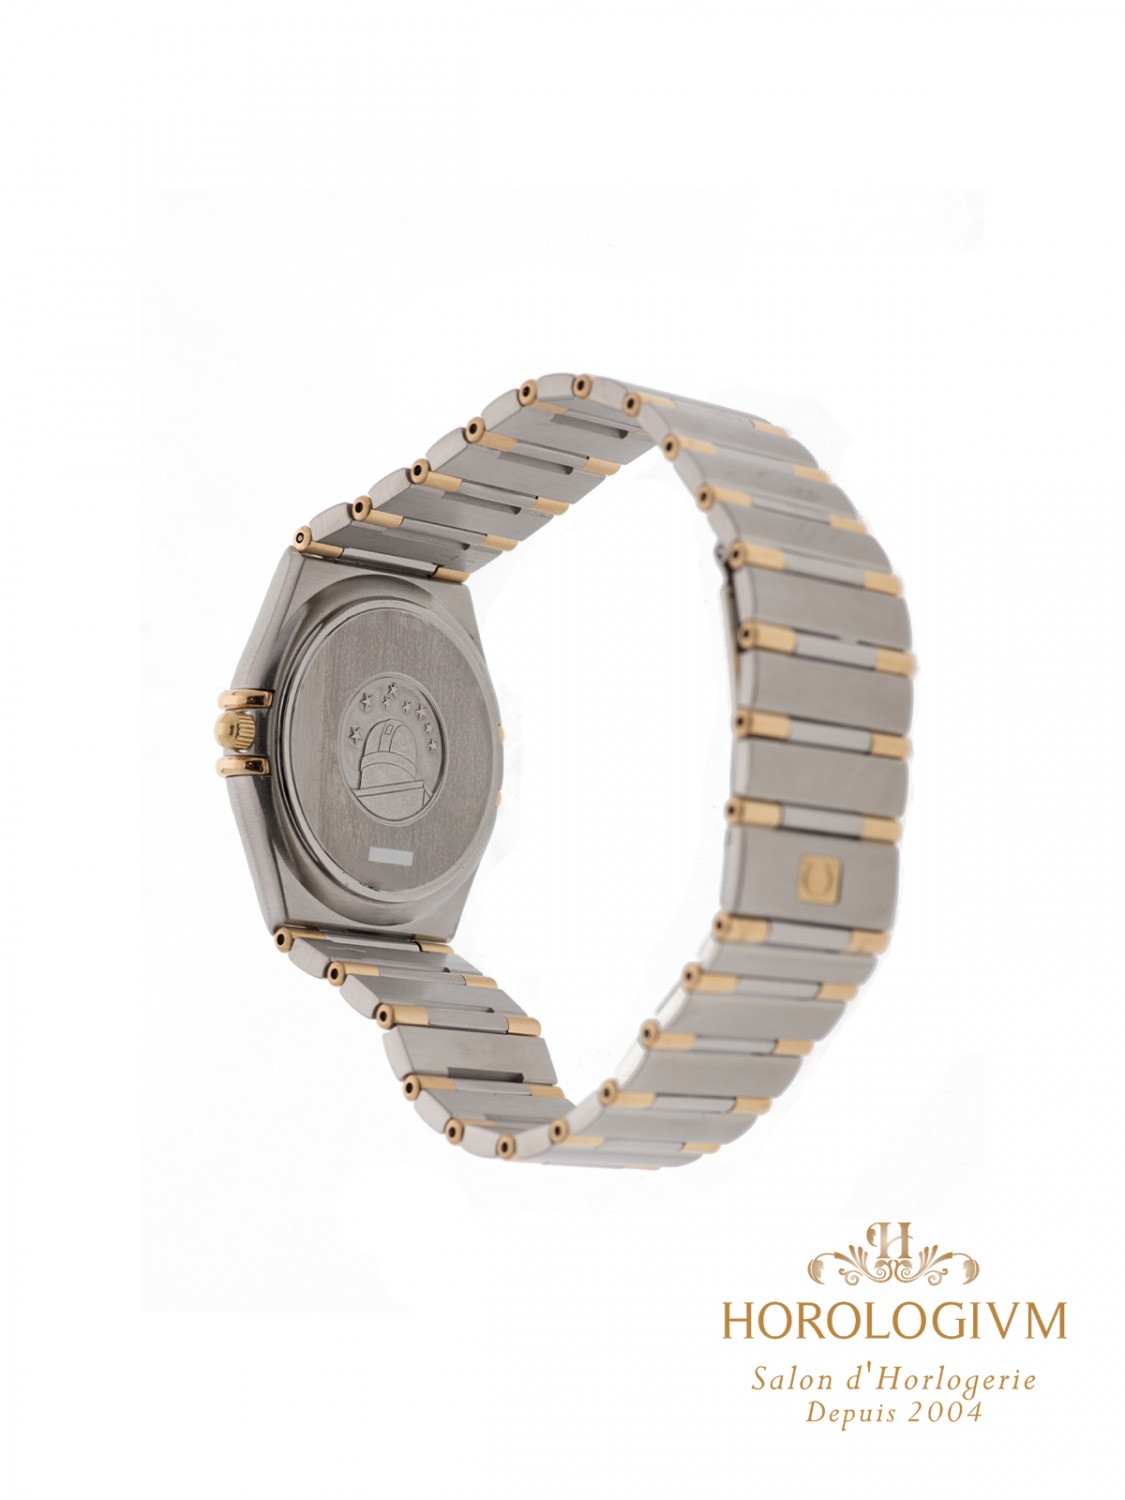 Omega Constellation Two-Tone 33.4MM Ref. 13121000 watch, two - tone (bi - colored) silver (case) and yellow gold (bezel)